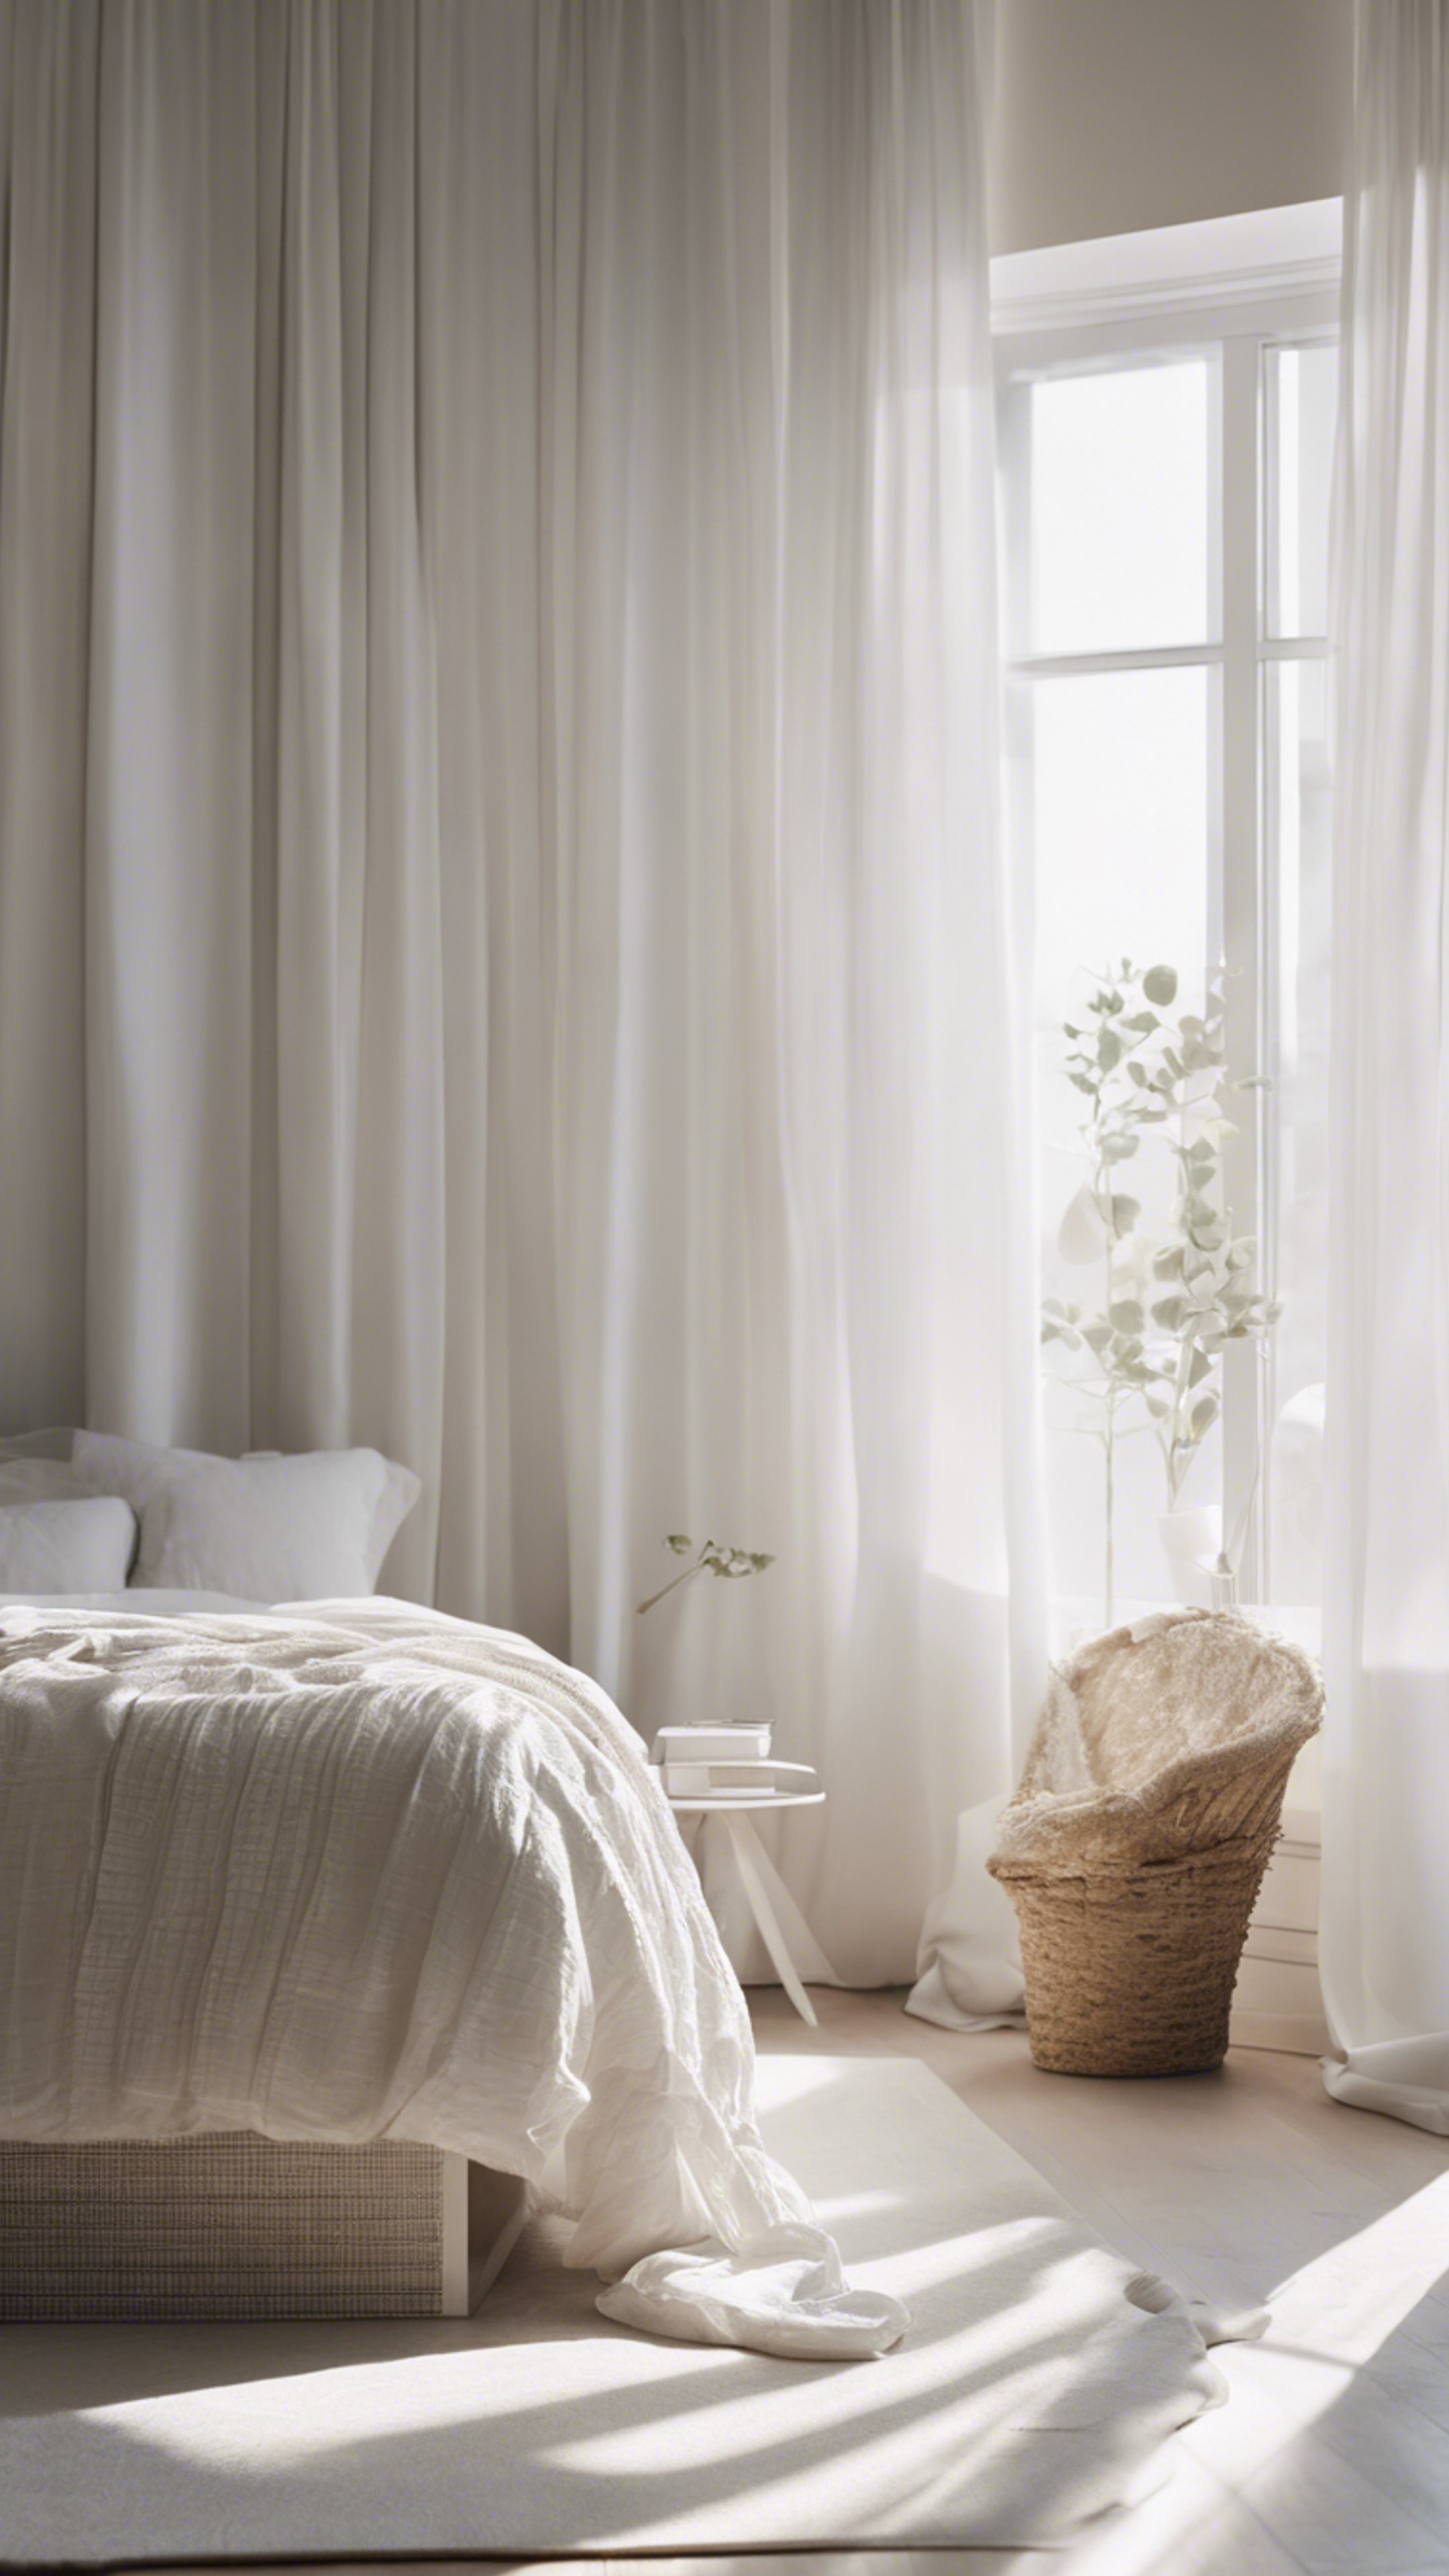 A serene white bedroom with a minimalist aesthetic, sunlight streaming through sheer curtains Tapéta[e50a9fa27884450ea562]